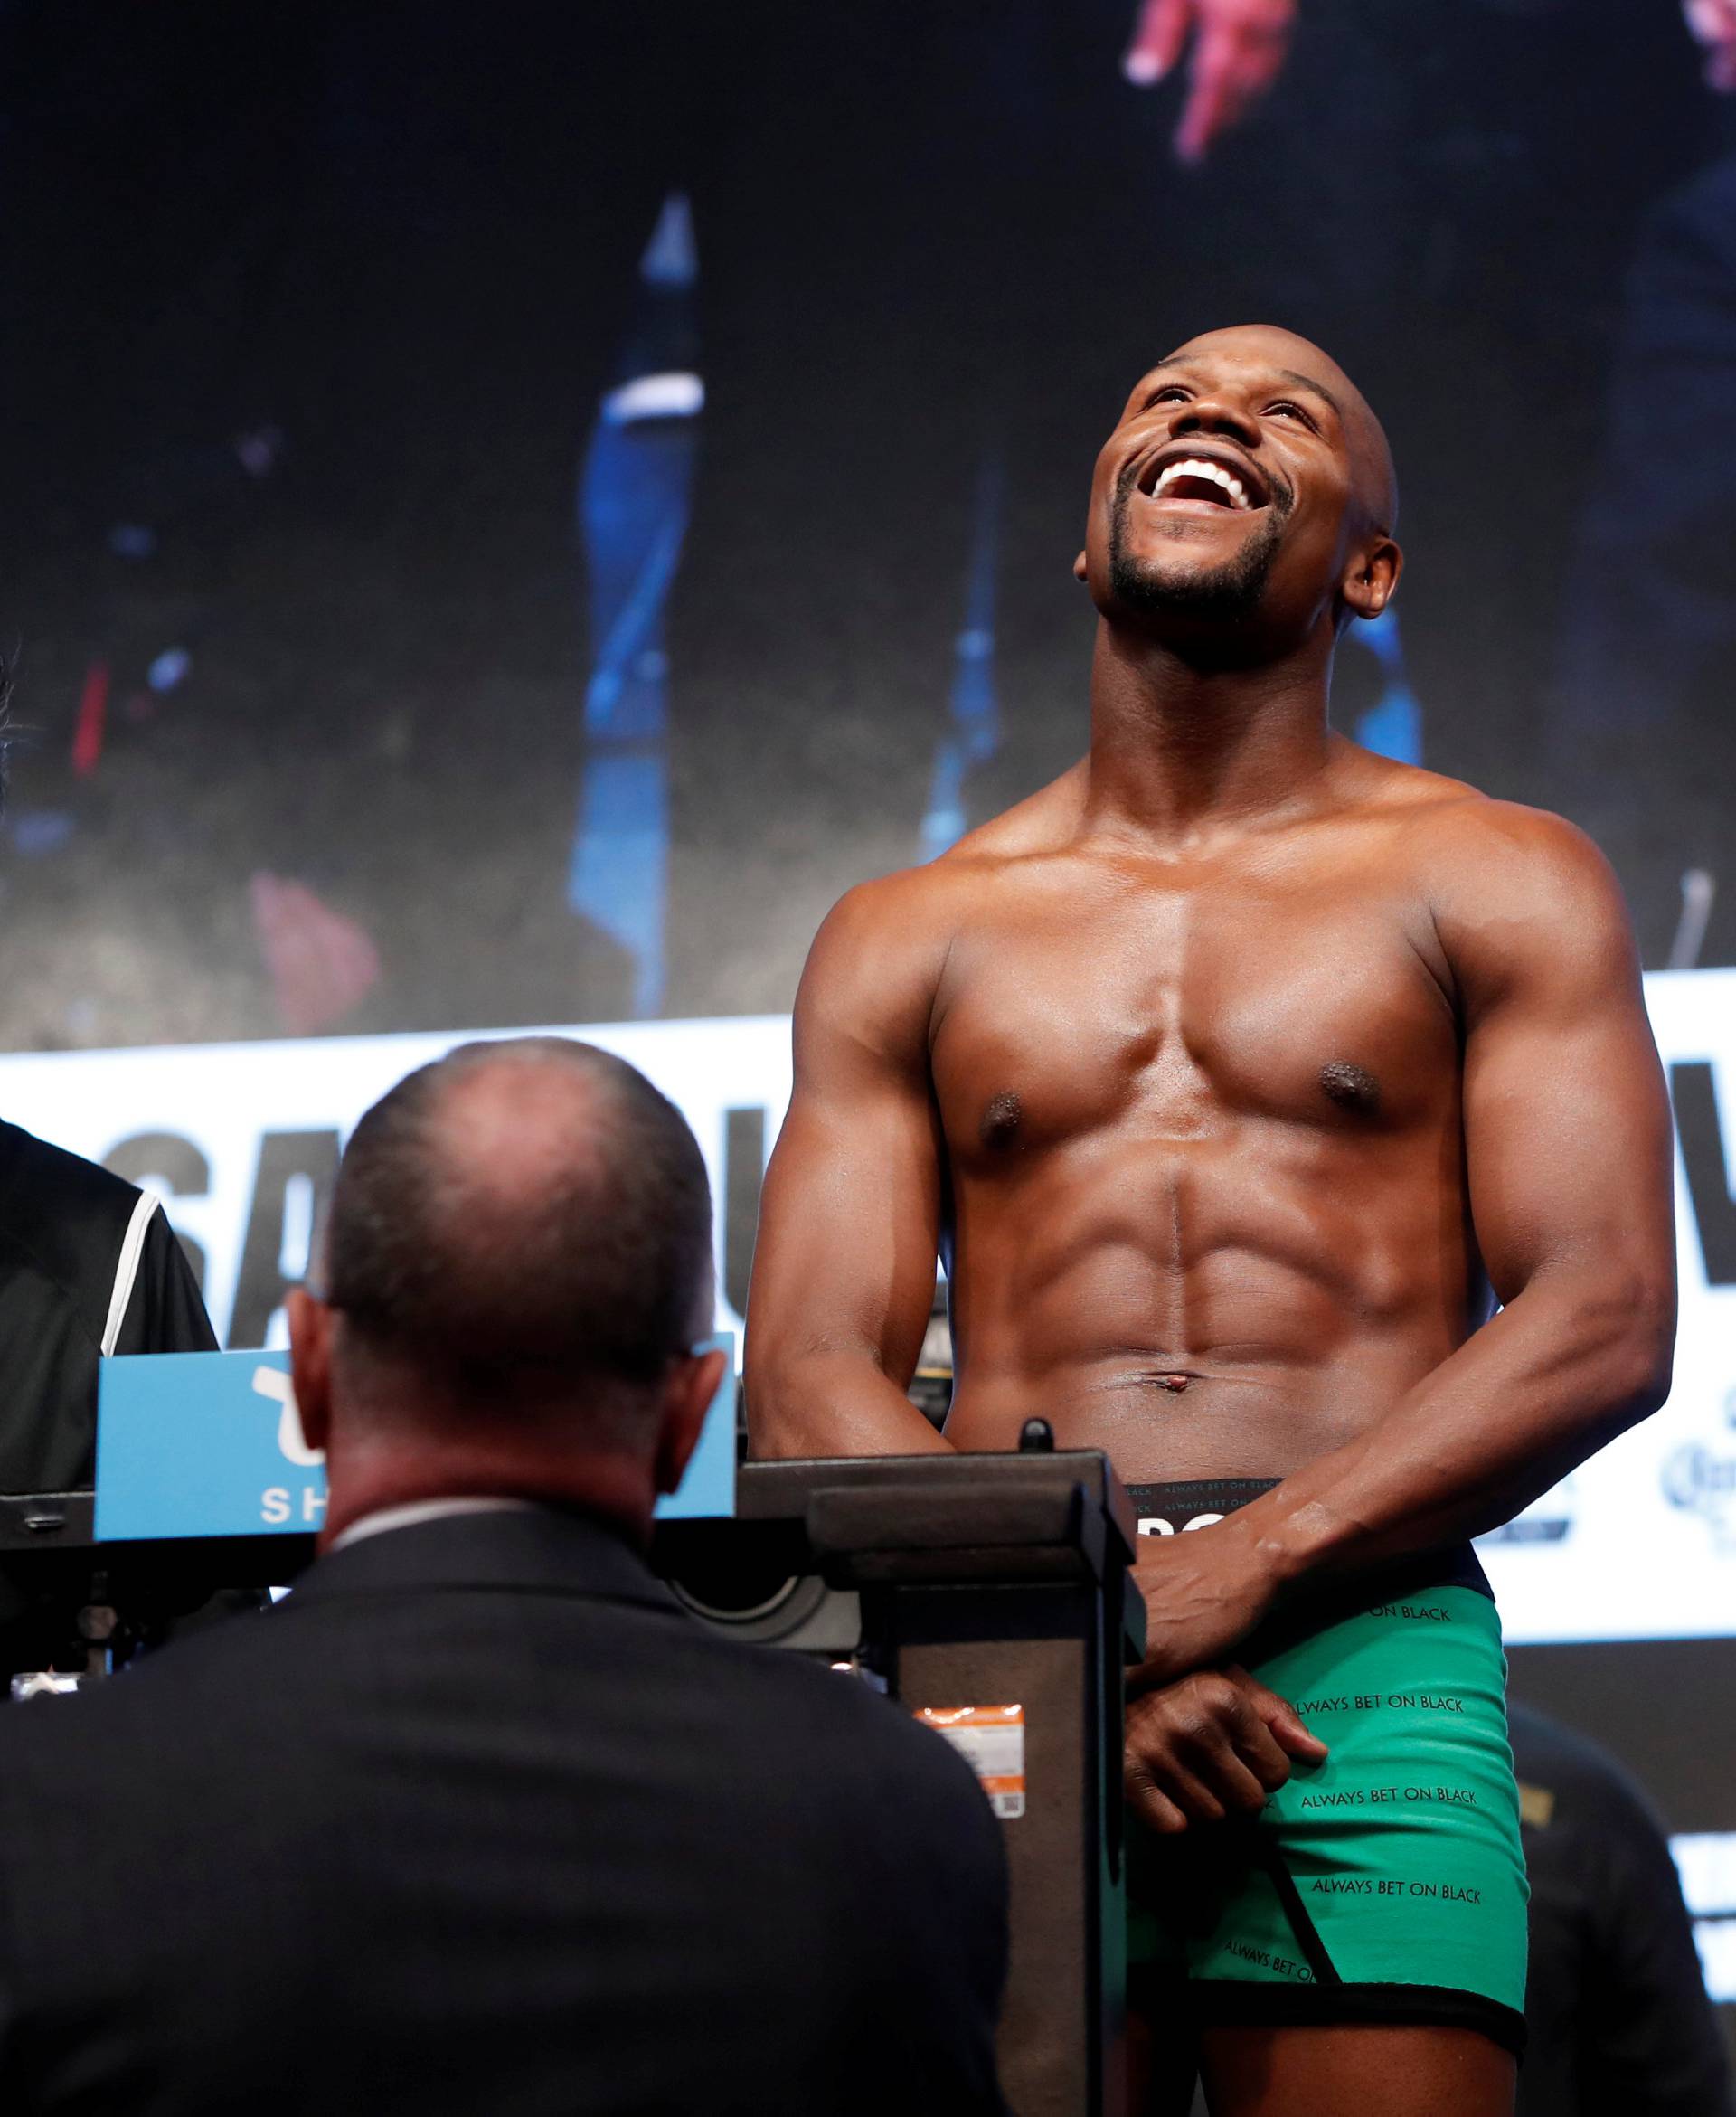 Undefeated boxer Floyd Mayweather Jr. of the U.S. smiles on the scale during his official weigh-in at T-Mobile Arena in Las Vegas